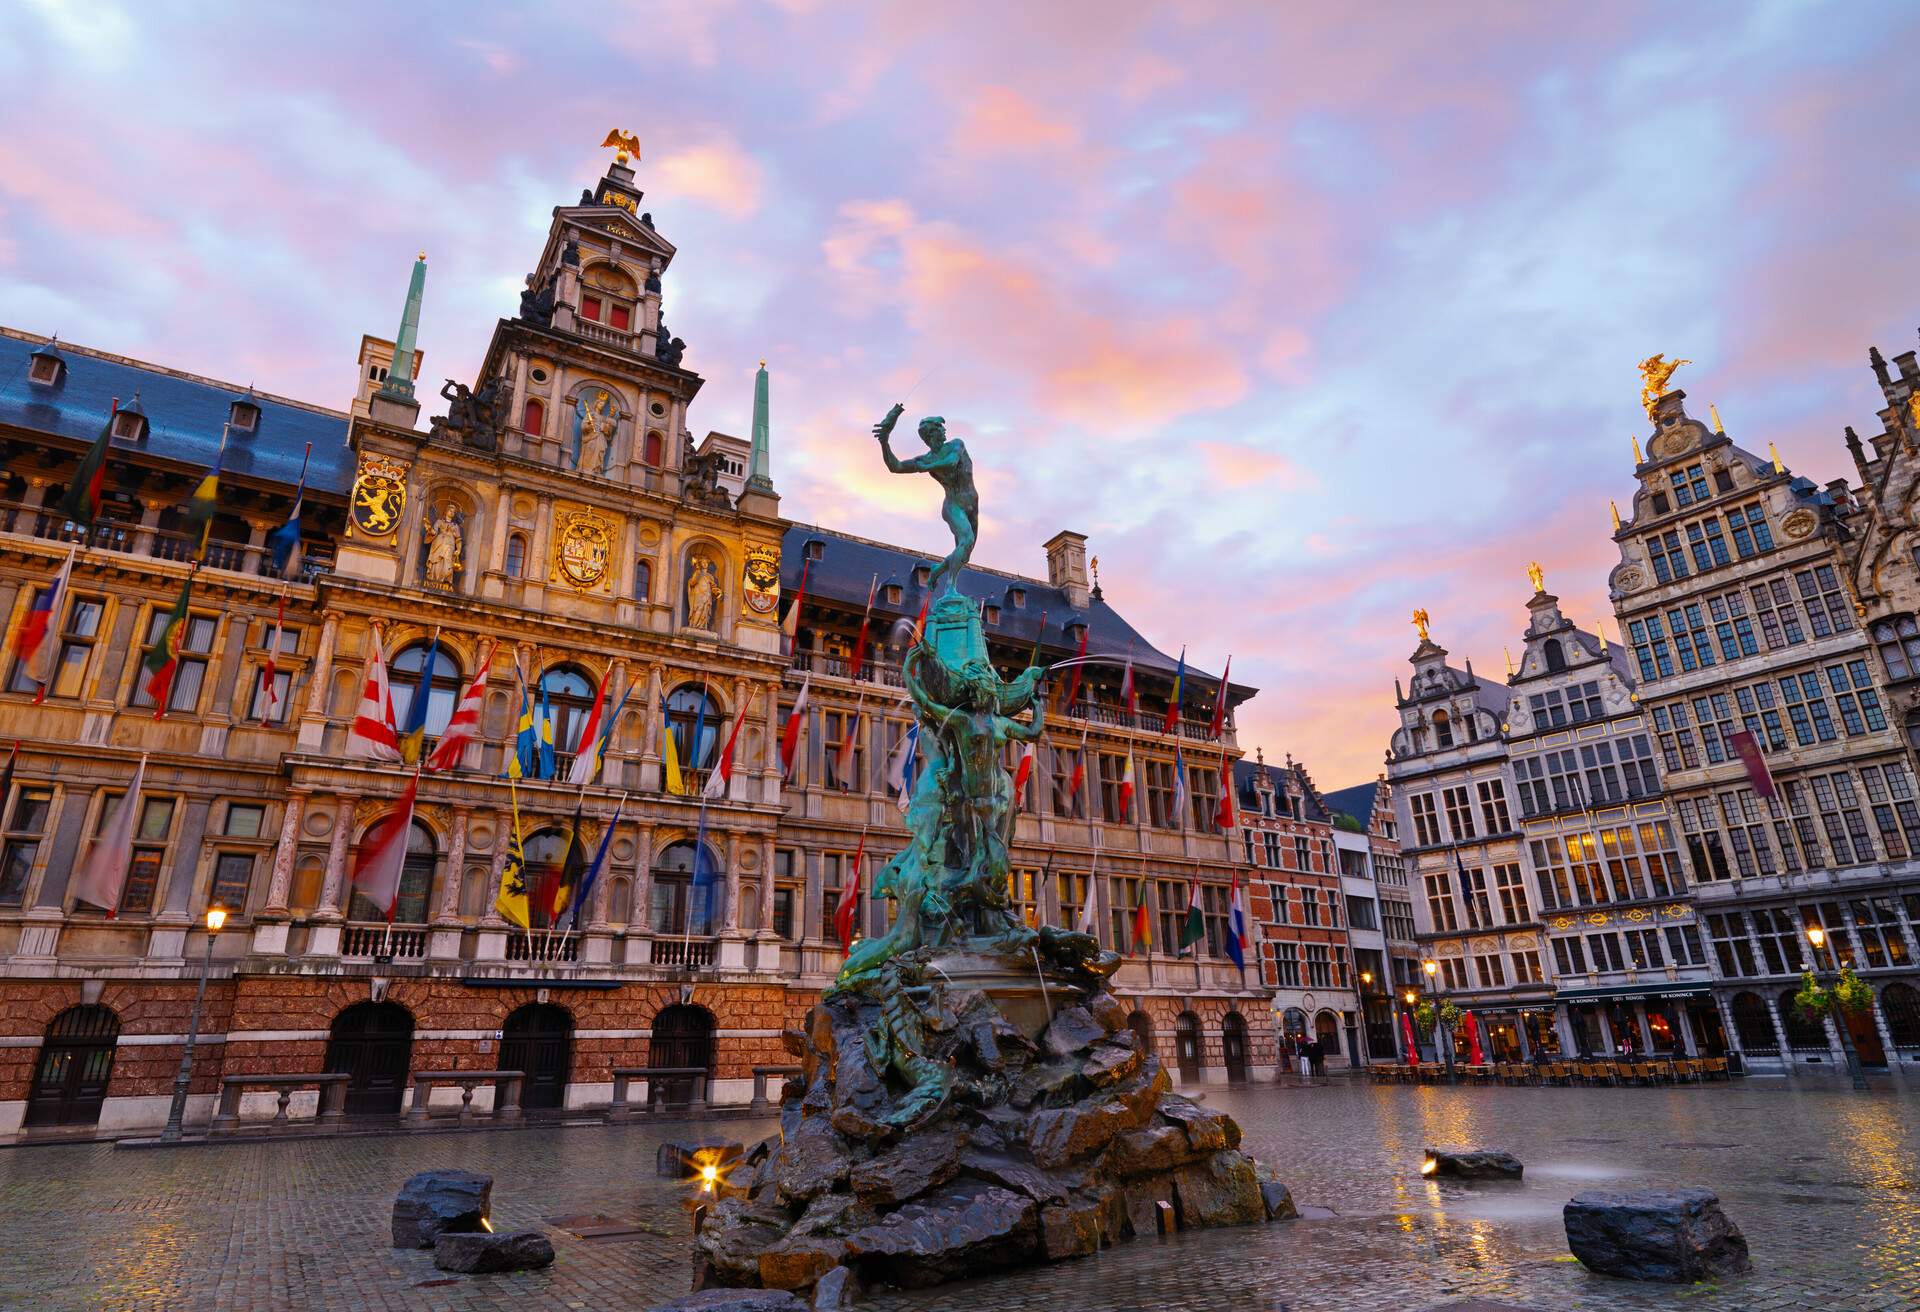 DEST_BELGIUM_ANTWERP_MAIN_SQUARE_BRABO_FOUNTAIN_GettyImages-97540943